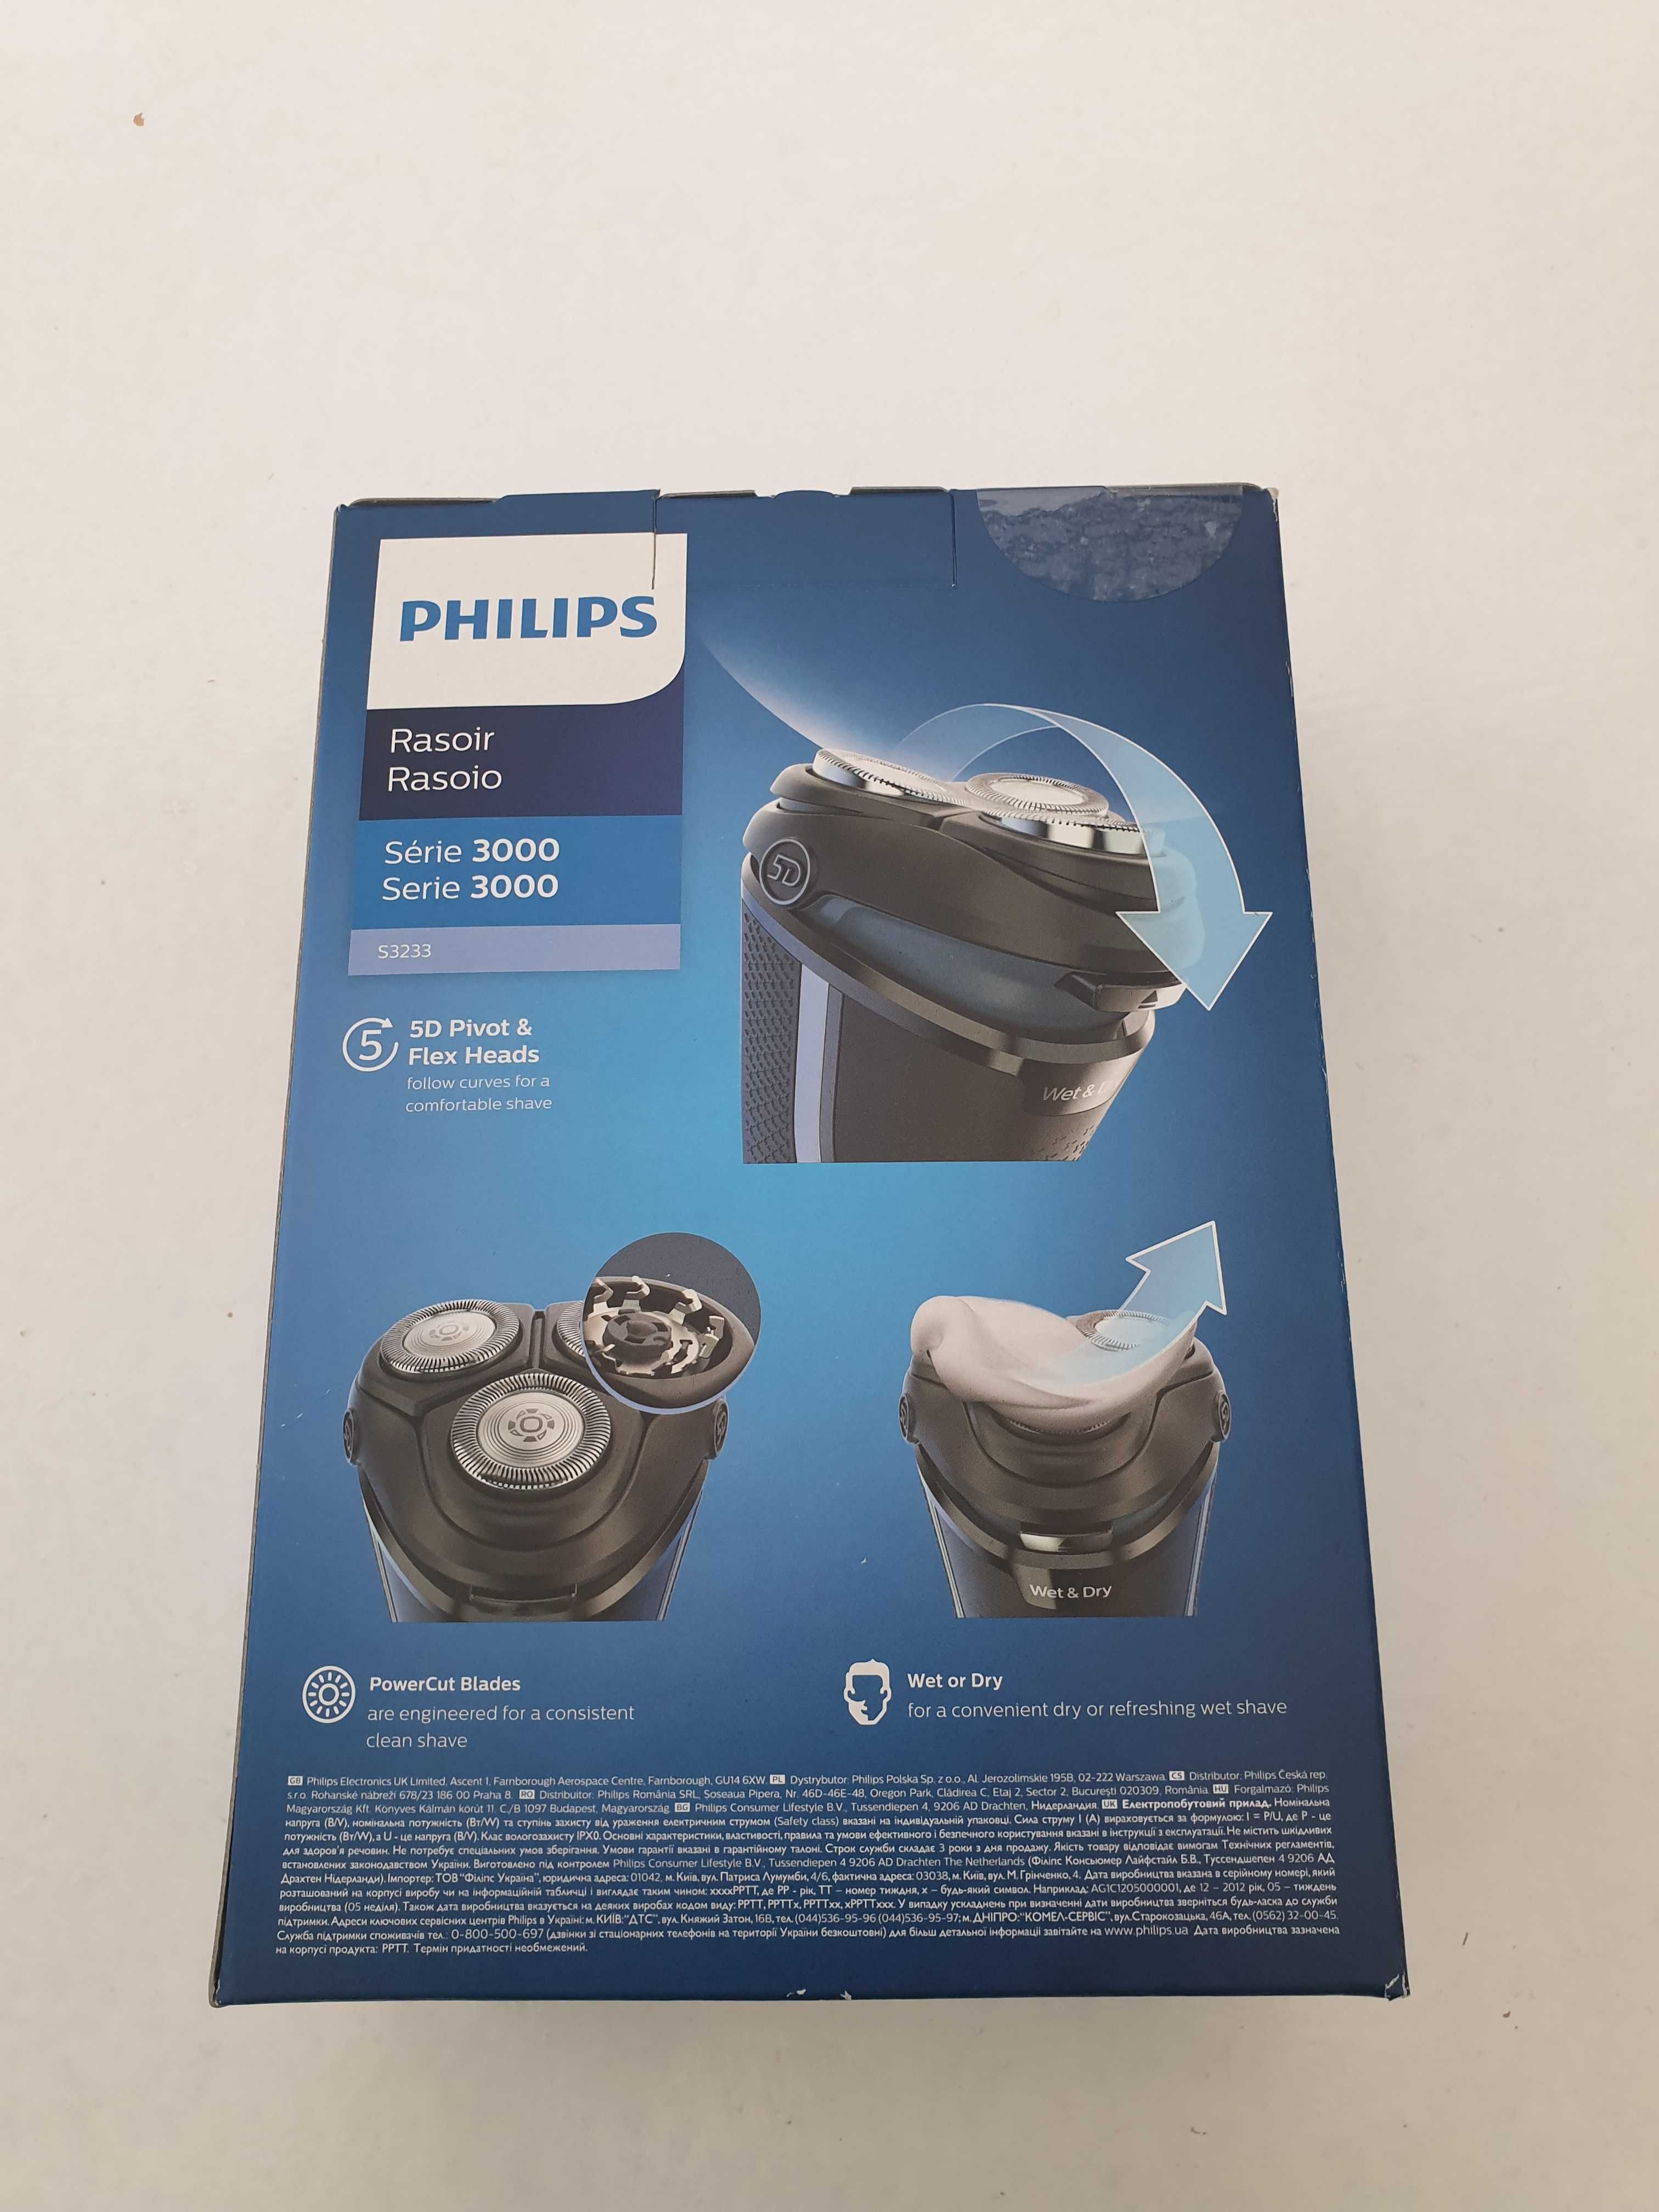 Philips shaver 3000 series